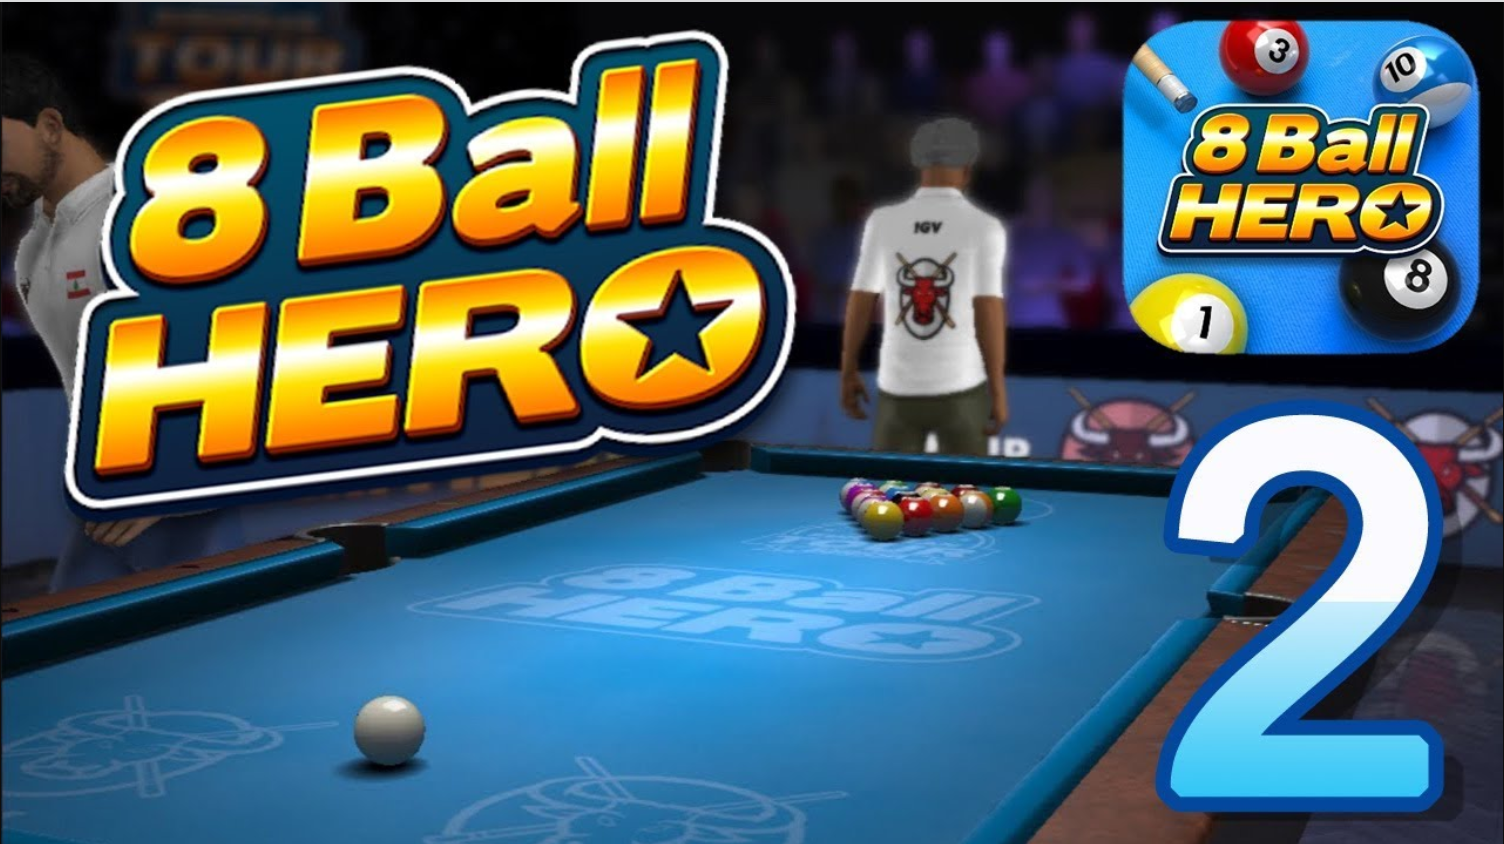 8 Ball Hero game for PC